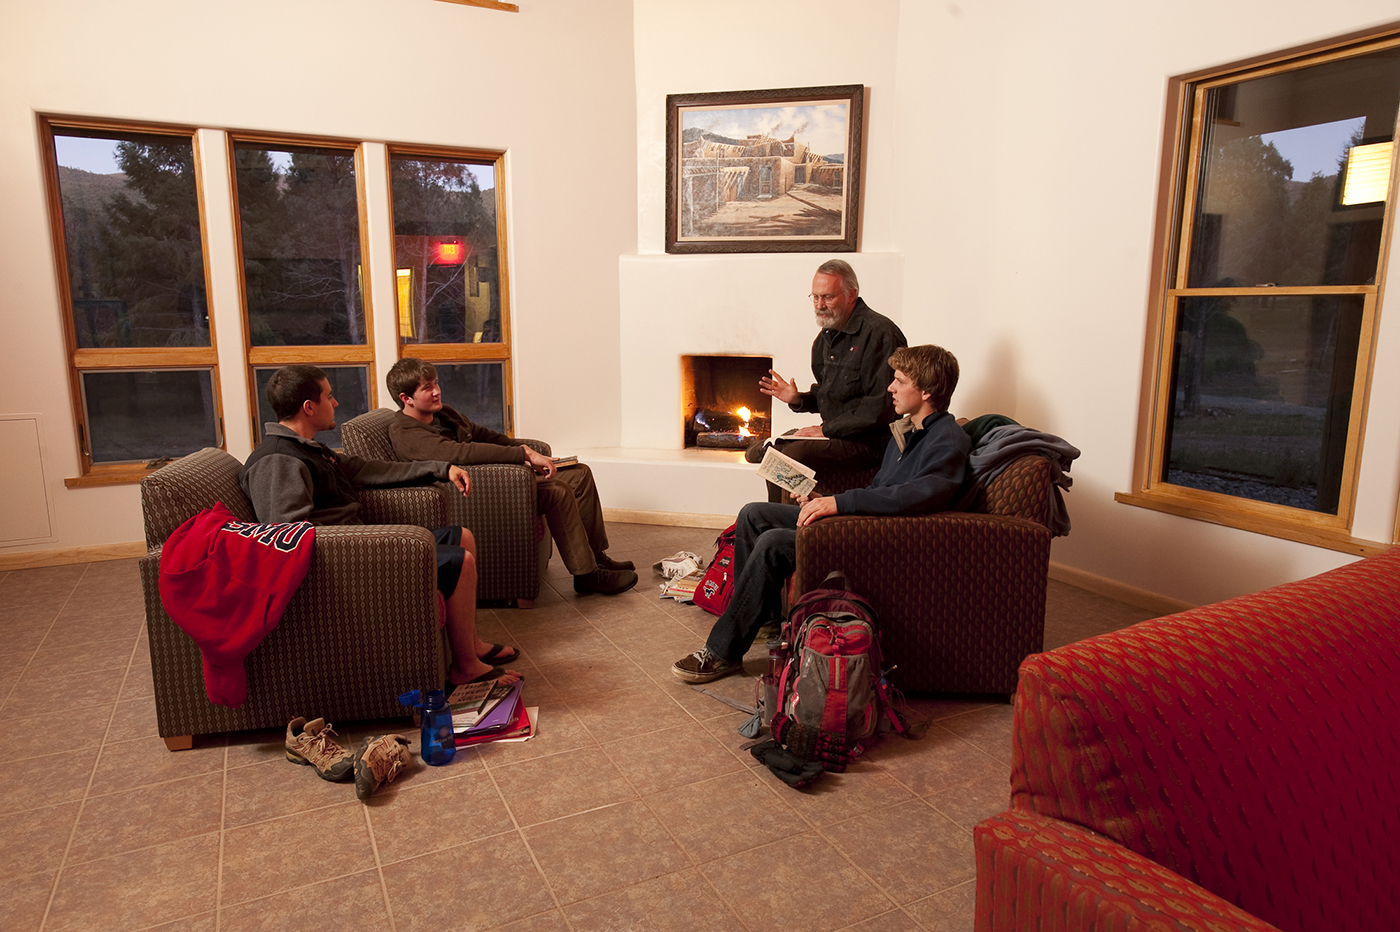 SMU-in-Taos faculty member teaches a small group inside a casita on campus